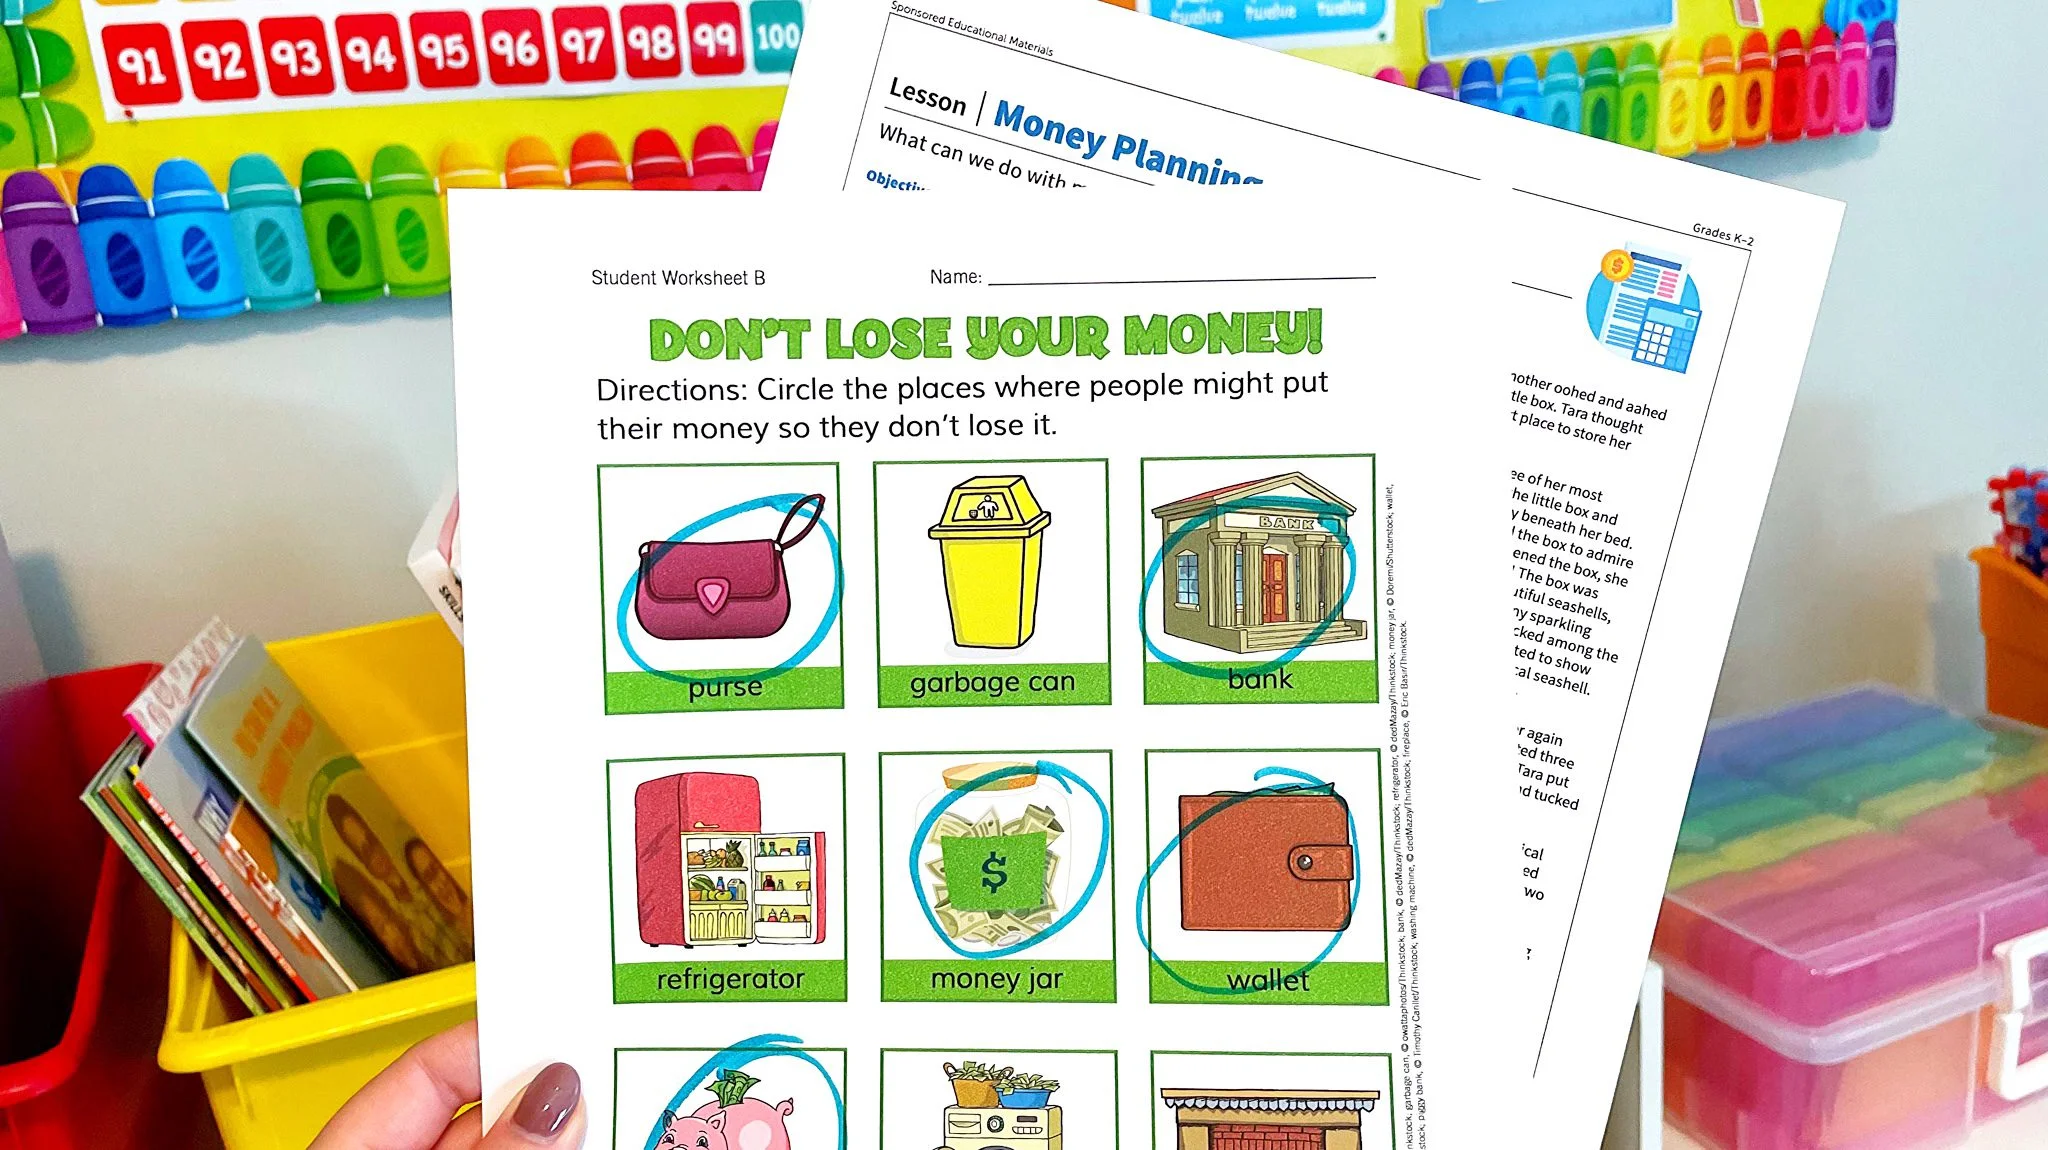 Protected: Teach Your Students Simple Money Planning with This Lesson and Activity Sheet